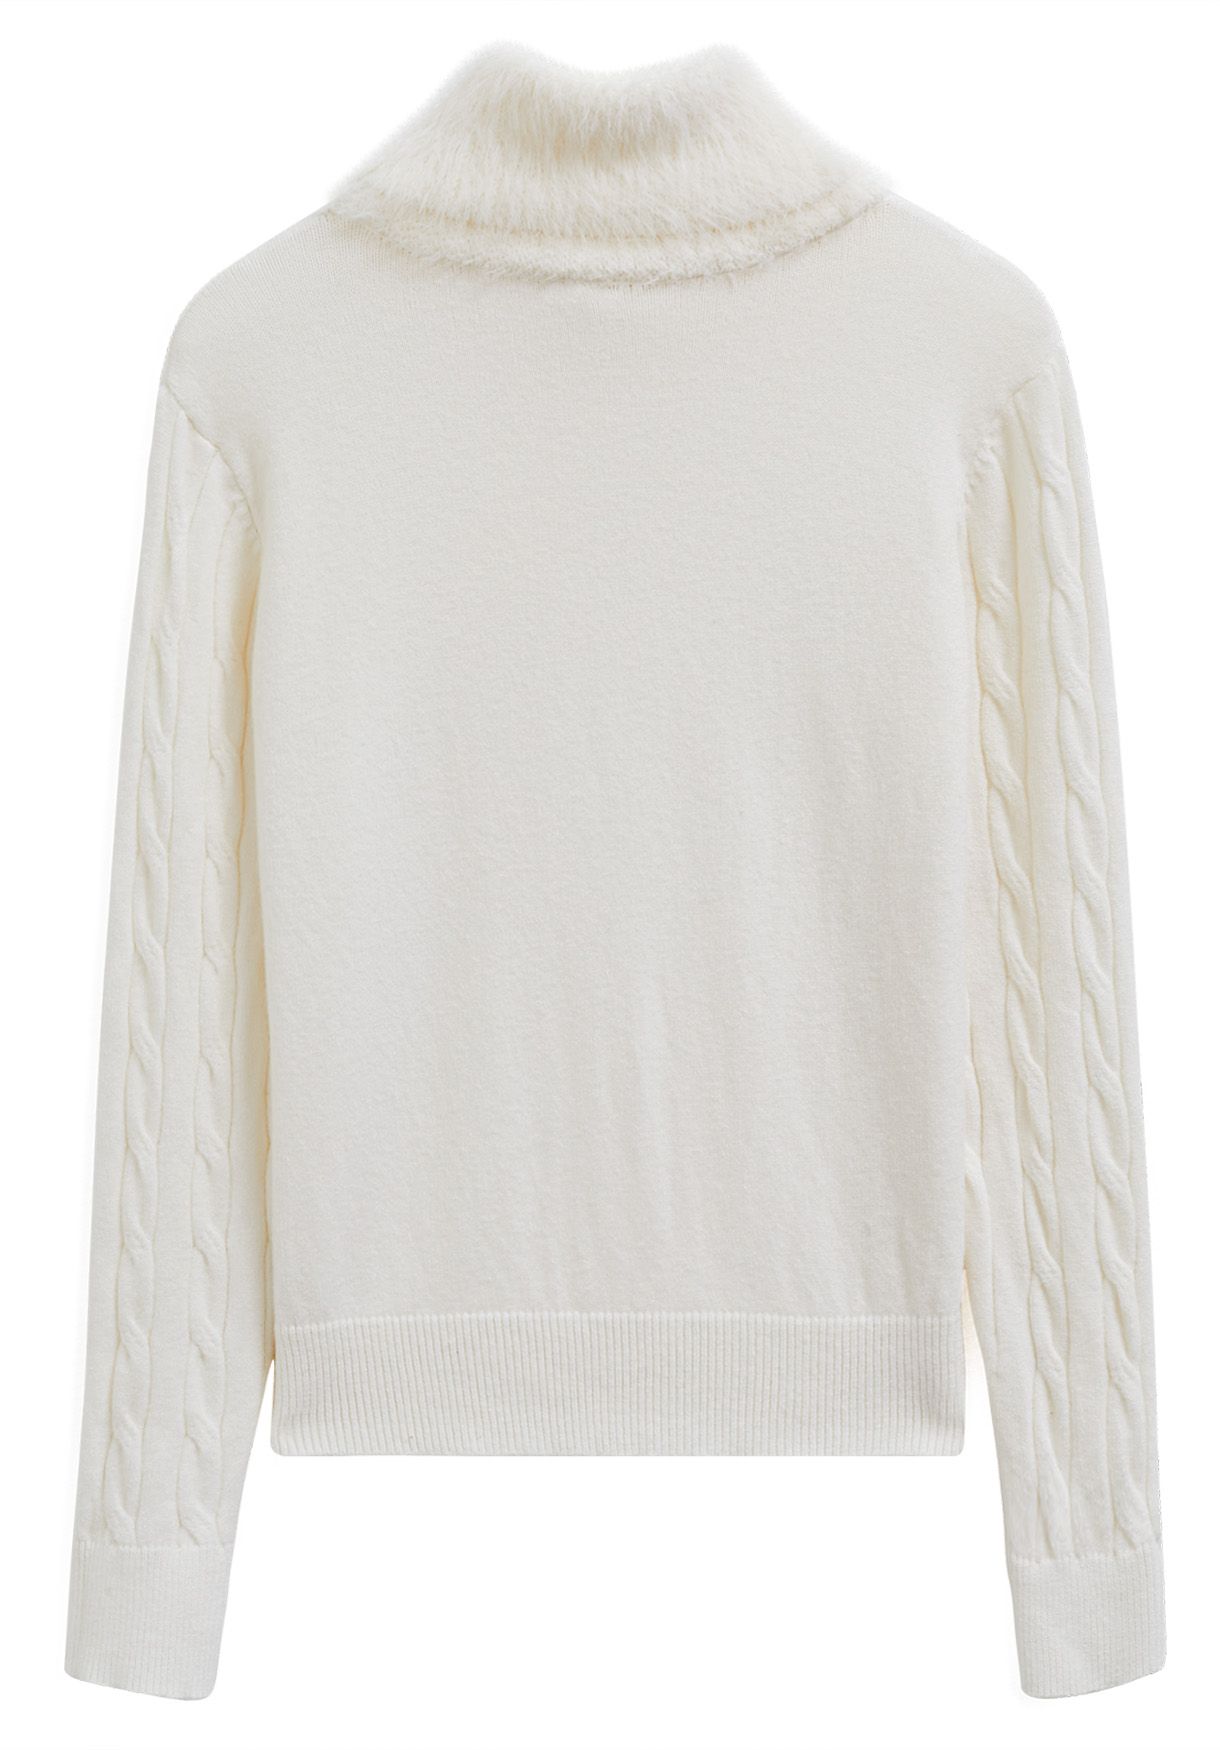 Soft Fuzzy Turtleneck Cable Knit Sweater in Cream